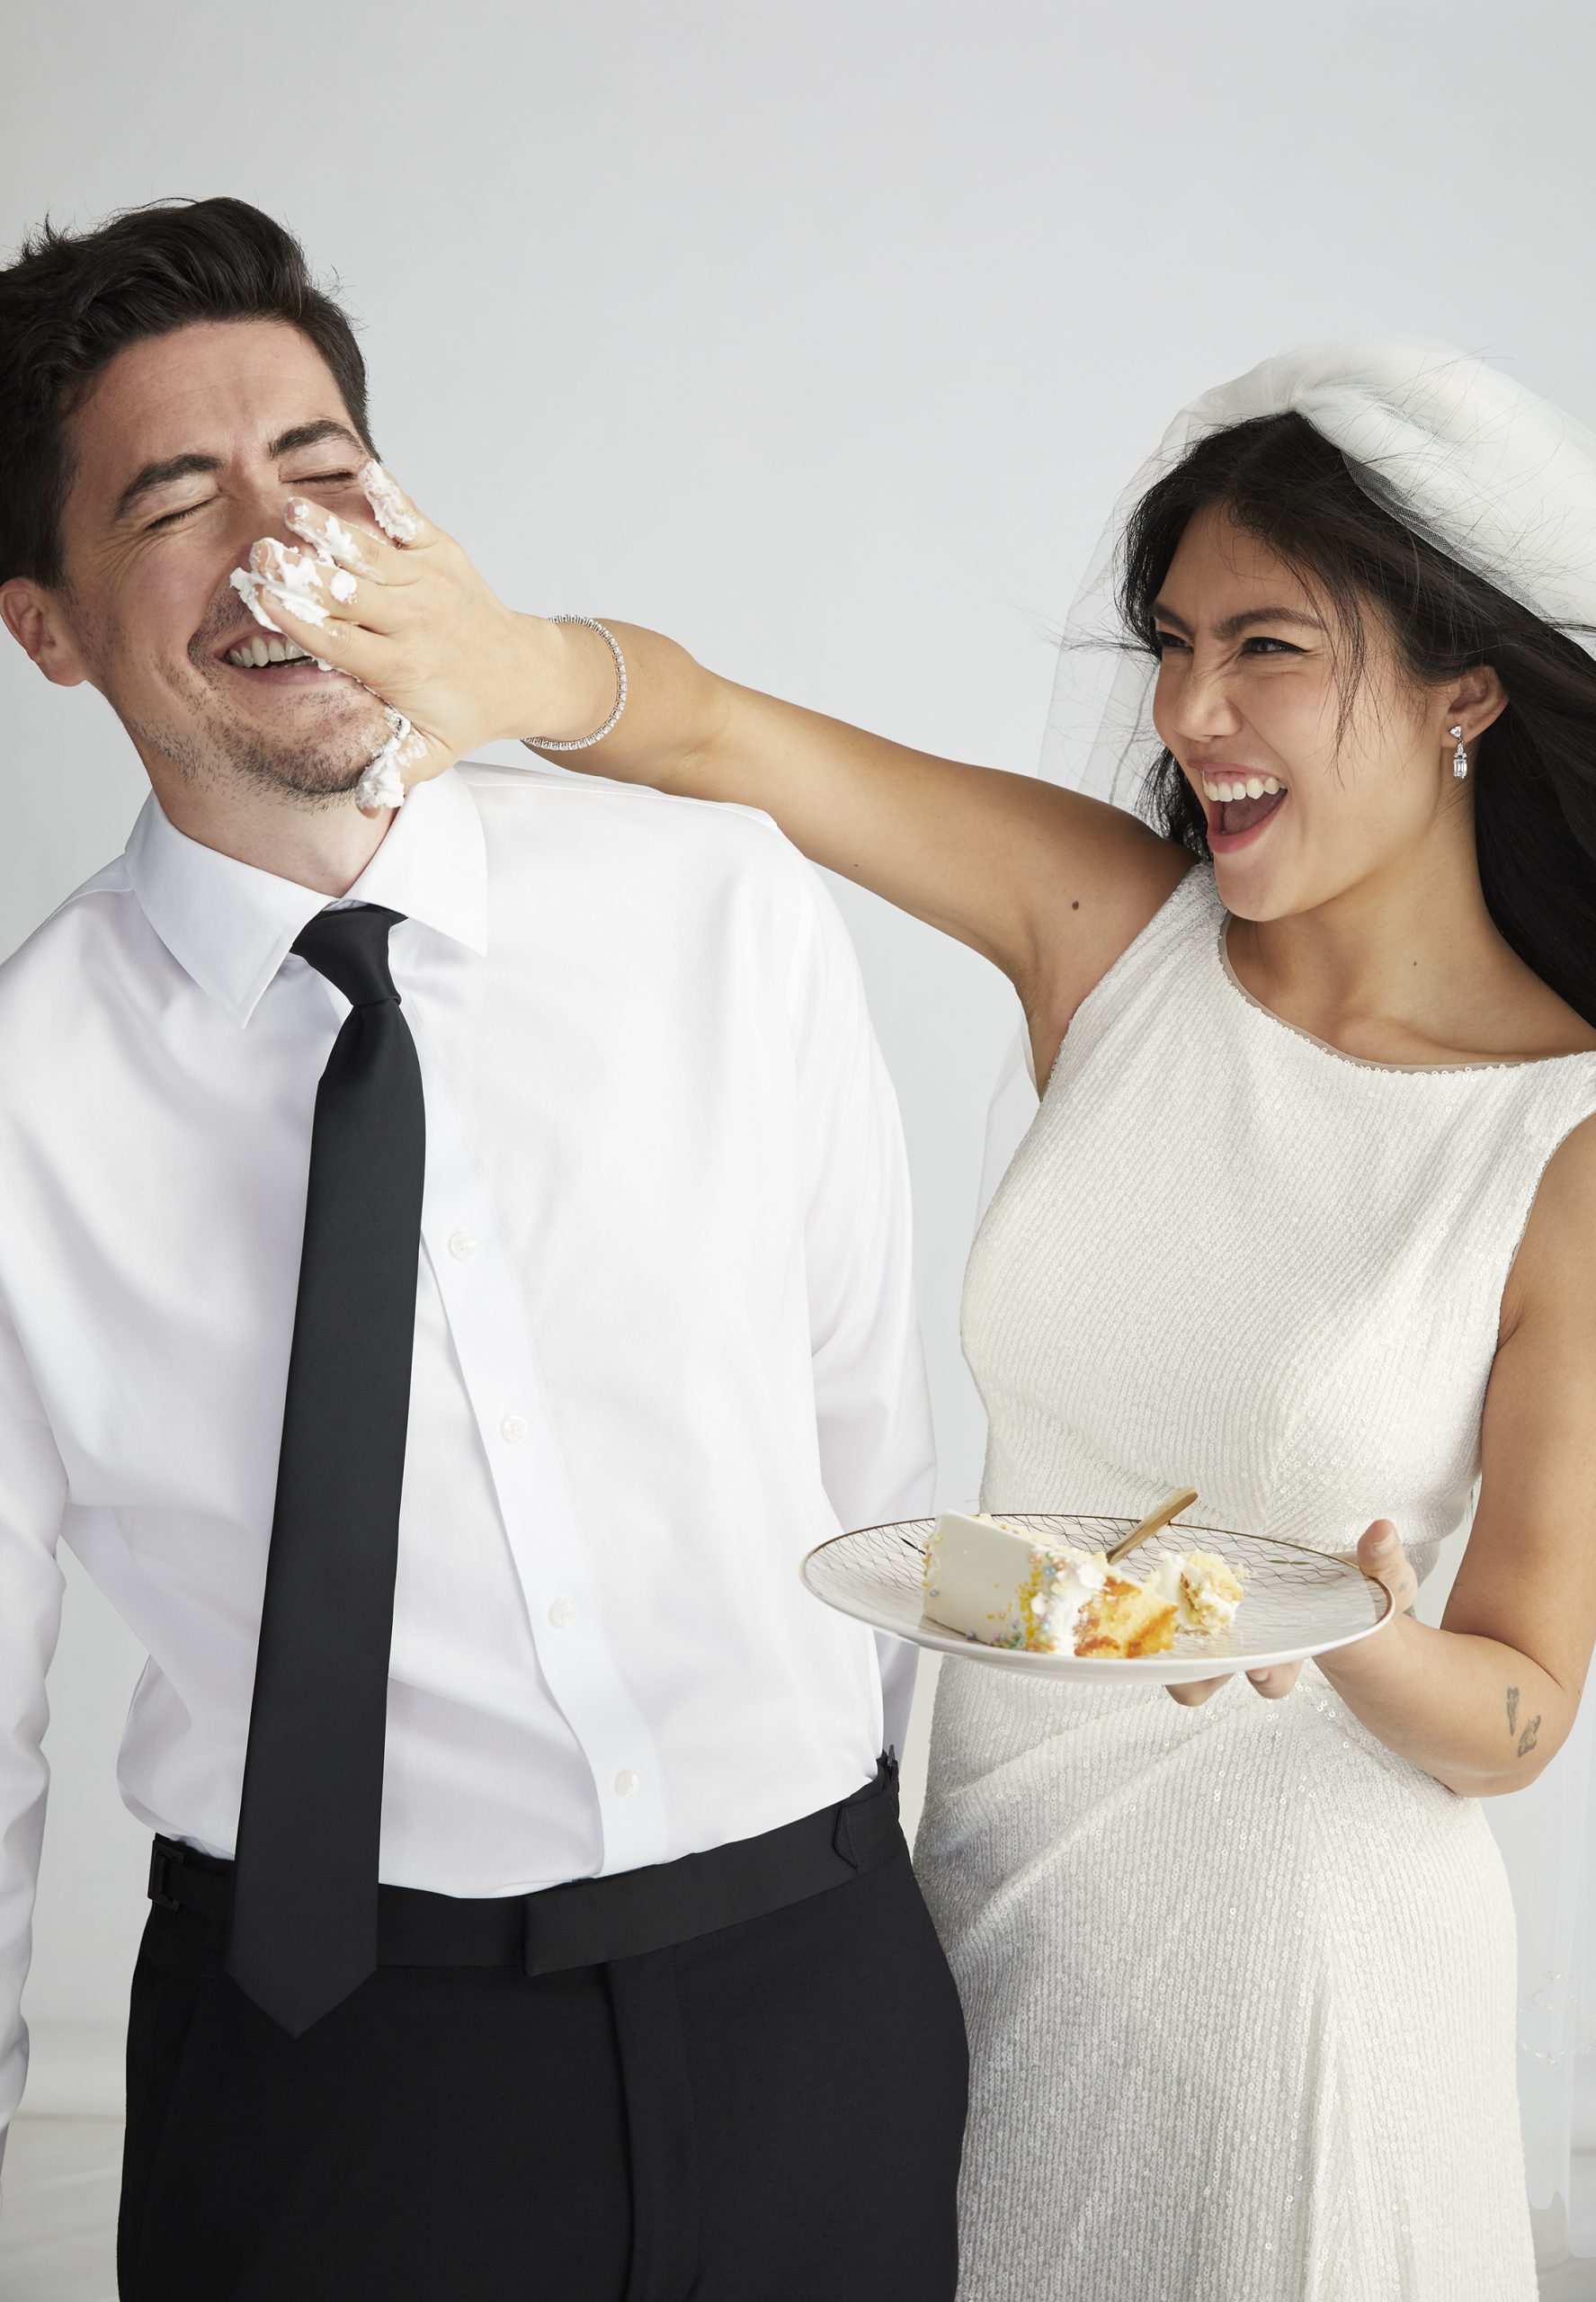 A couple eating cake on their wedding day